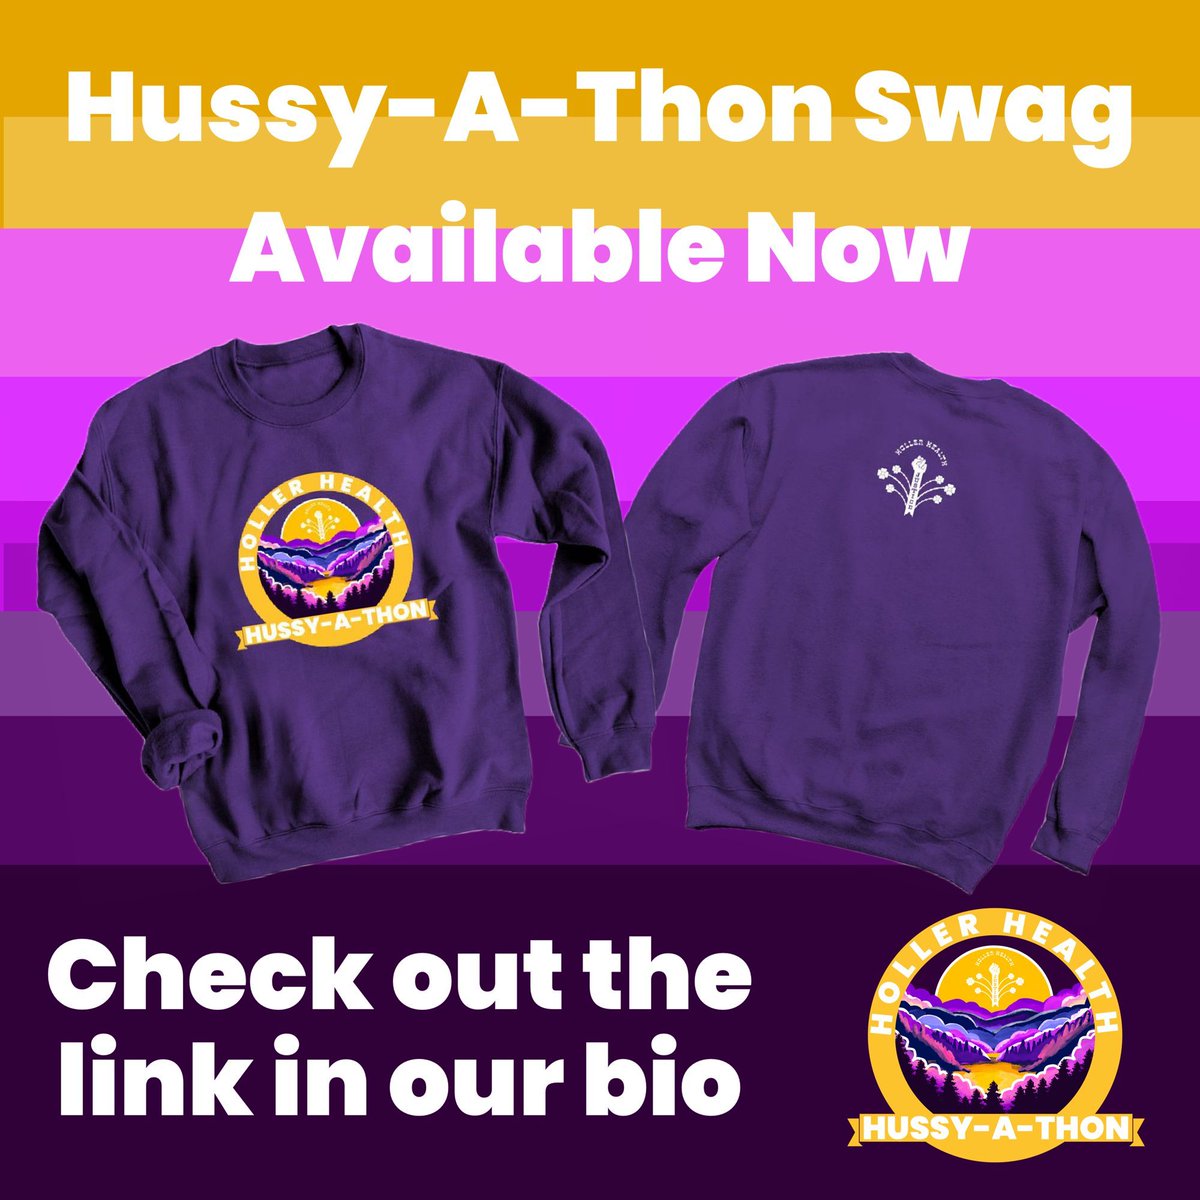 Gear up with #AbortionFunds & #HussyAThon24 merch! 🌟 Each purchase fuels our #Fthon24 goal, supporting access to legal abortion in style. Wear your commitment loud & proud. ✊🏾 🔗link in our bio! 🔗